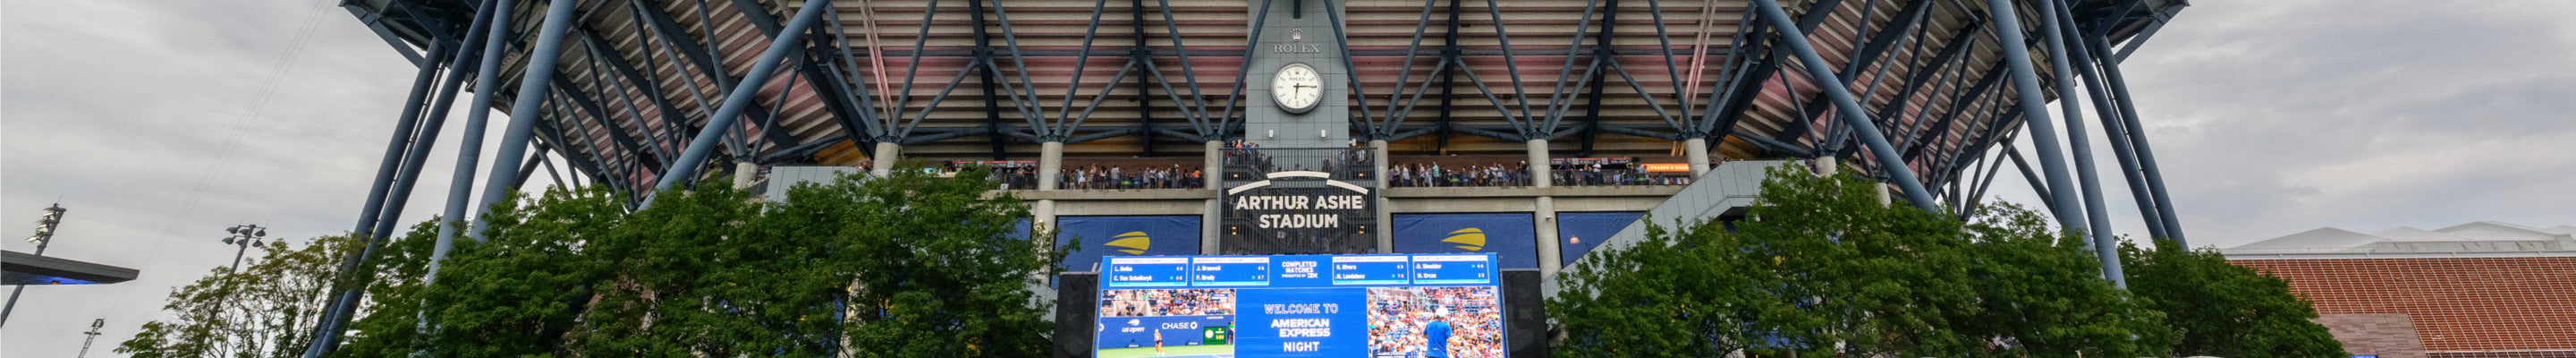 Rolex Clock on the Arthur Ashe Stadium During the US Open